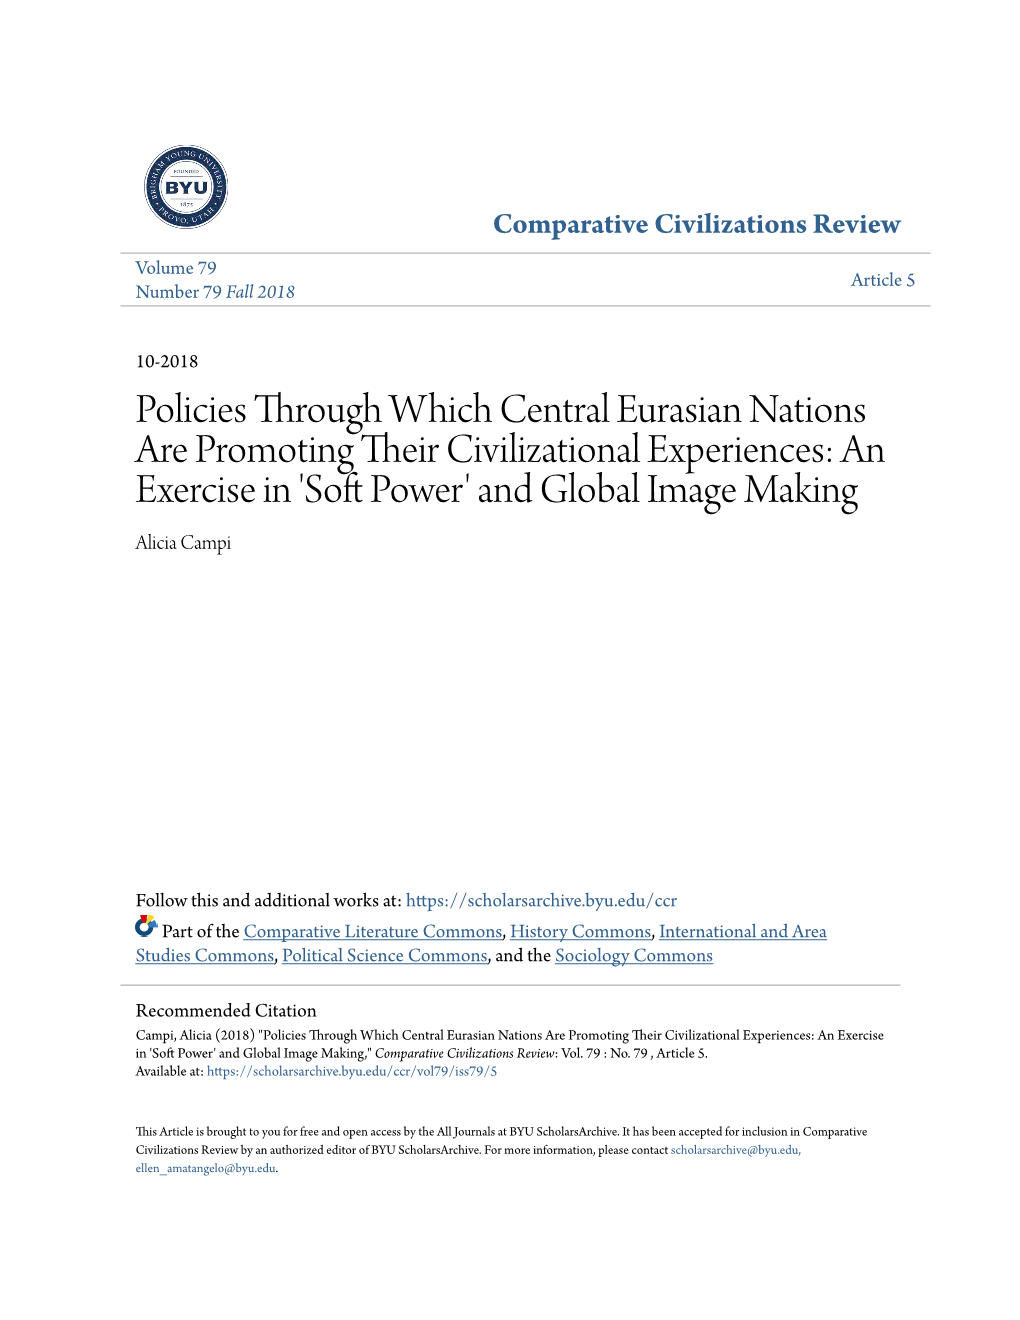 Policies Through Which Central Eurasian Nations Are Promoting Their Ic Vilizational Experiences: an Exercise in 'Soft Op Wer' and Global Image Making Alicia Campi